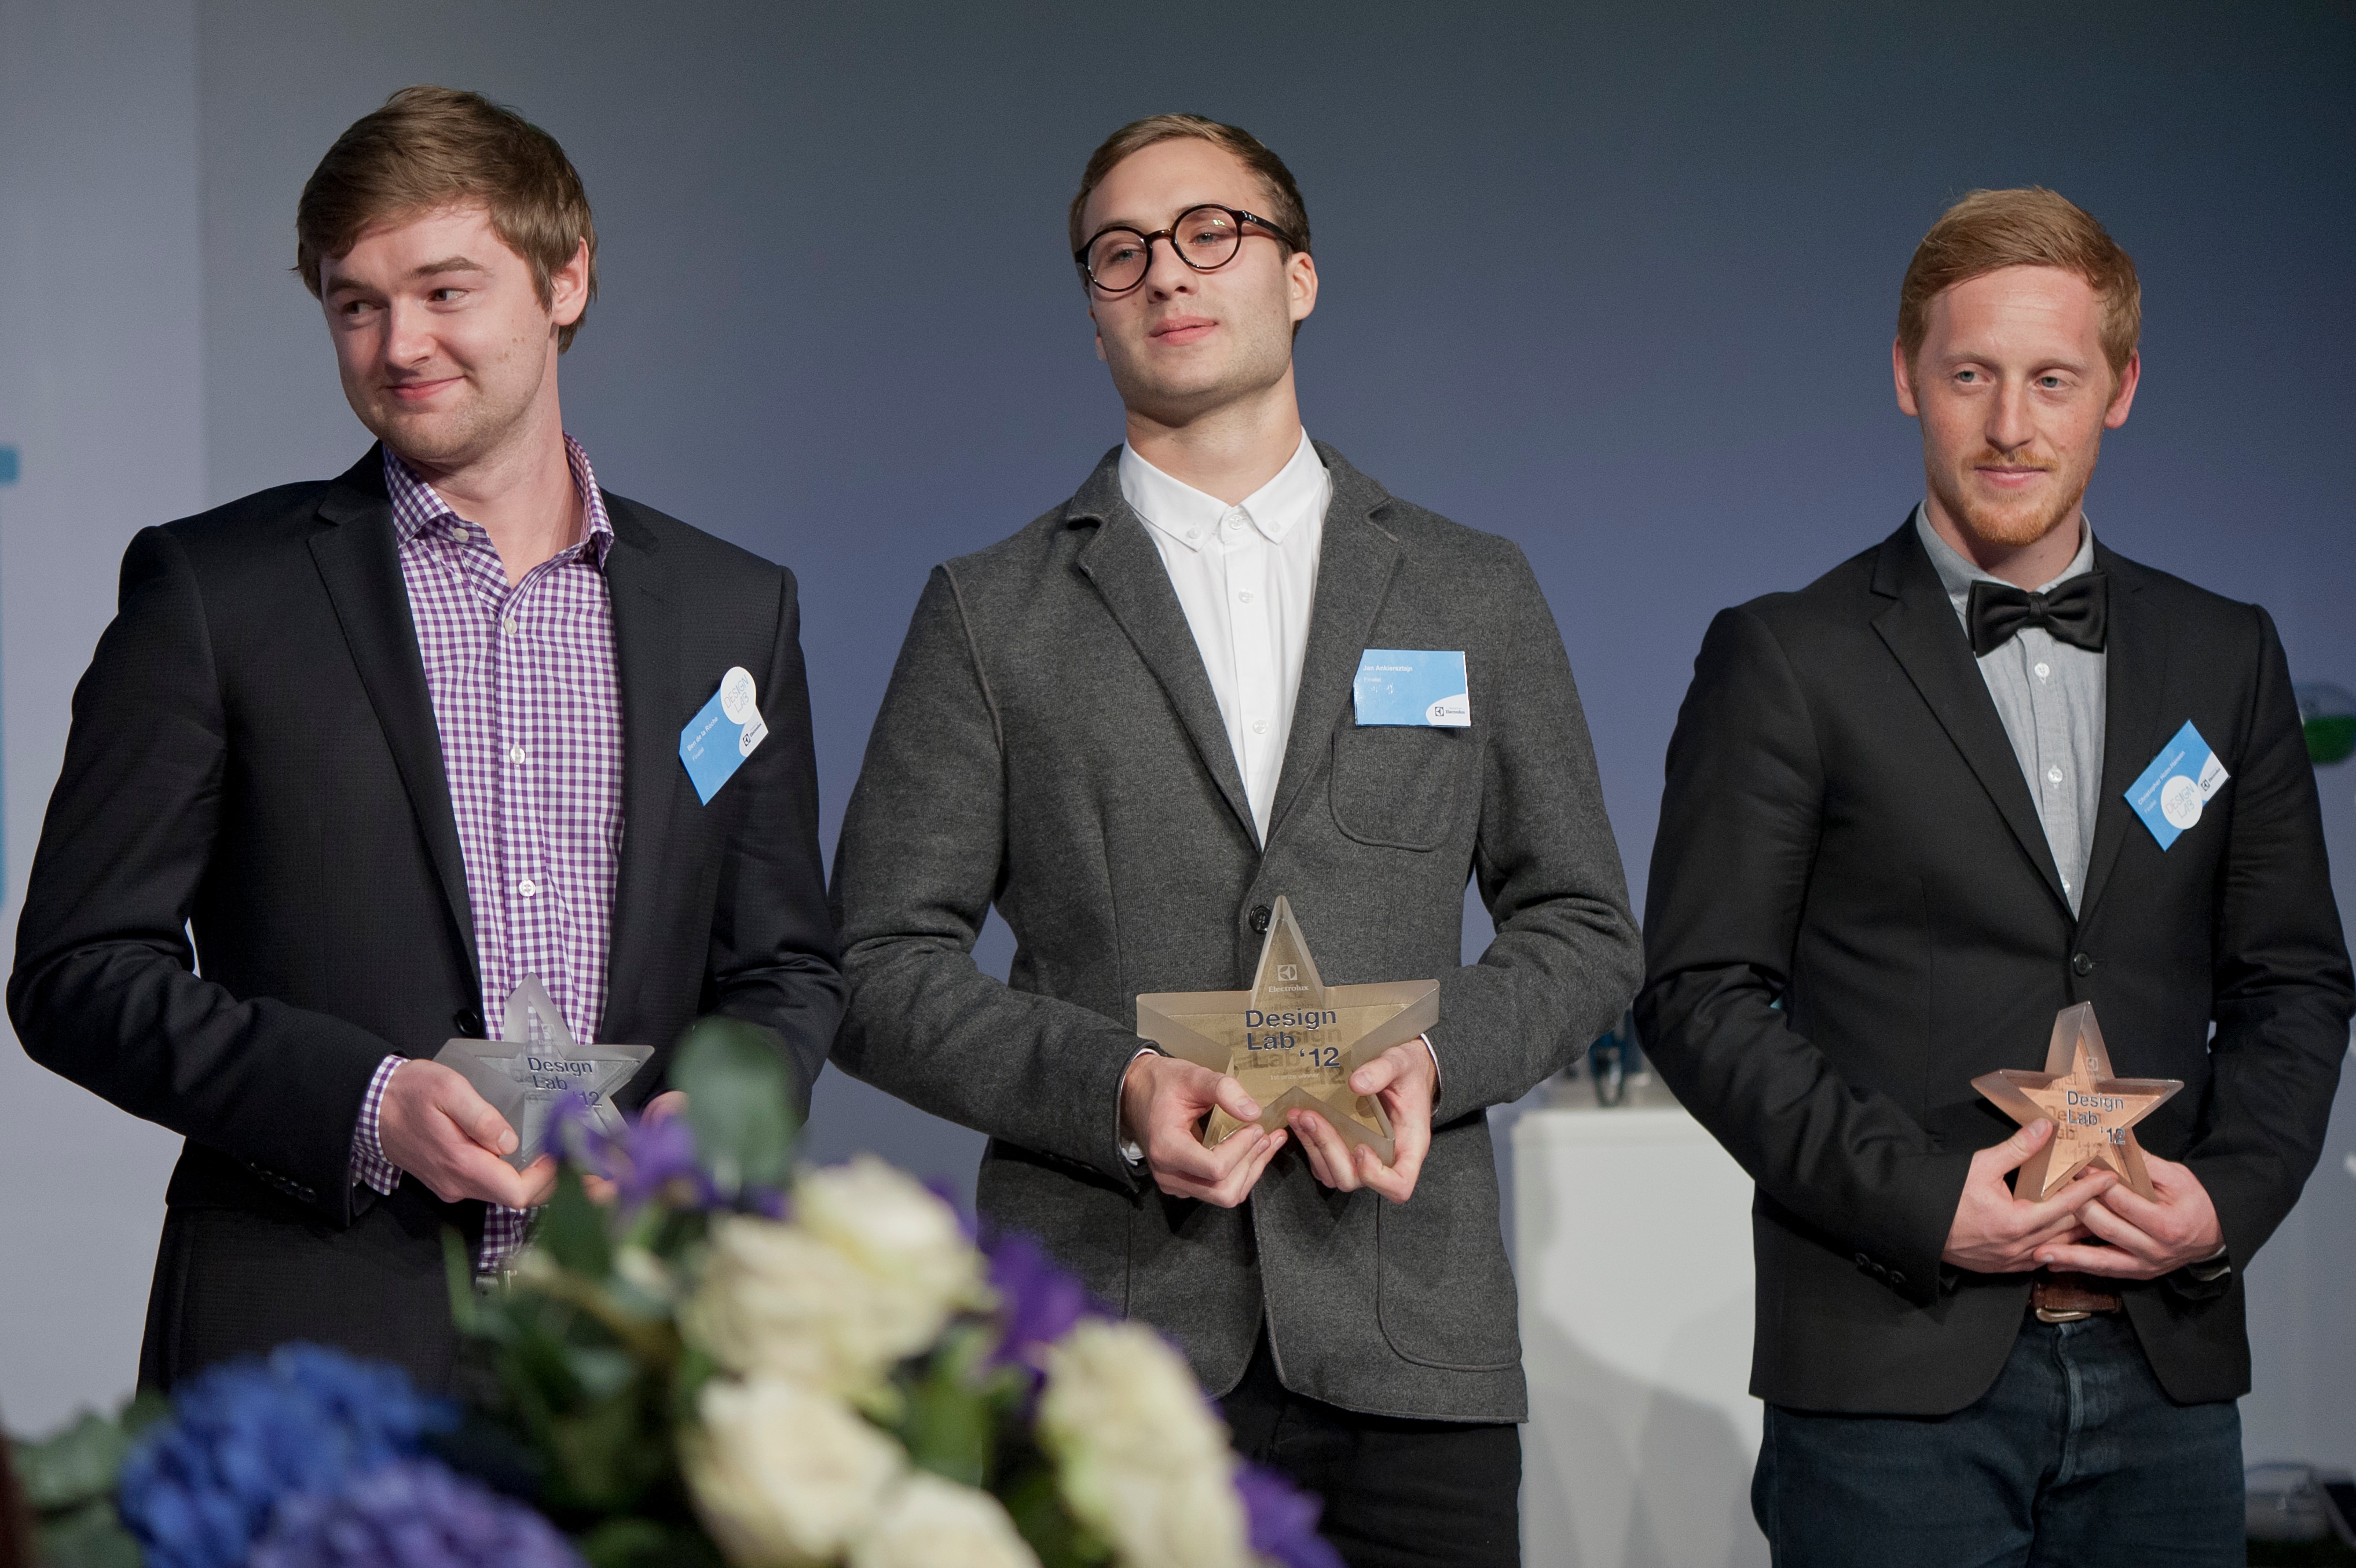 Electrolux Design Lab 2013 competition top three from left to right: Ben de la Roche from New Zealand took third prize, Jan Ankiersztajn from Poland took first prize and Christopher Holm-Hansen from Denmark took second prize in the competition.